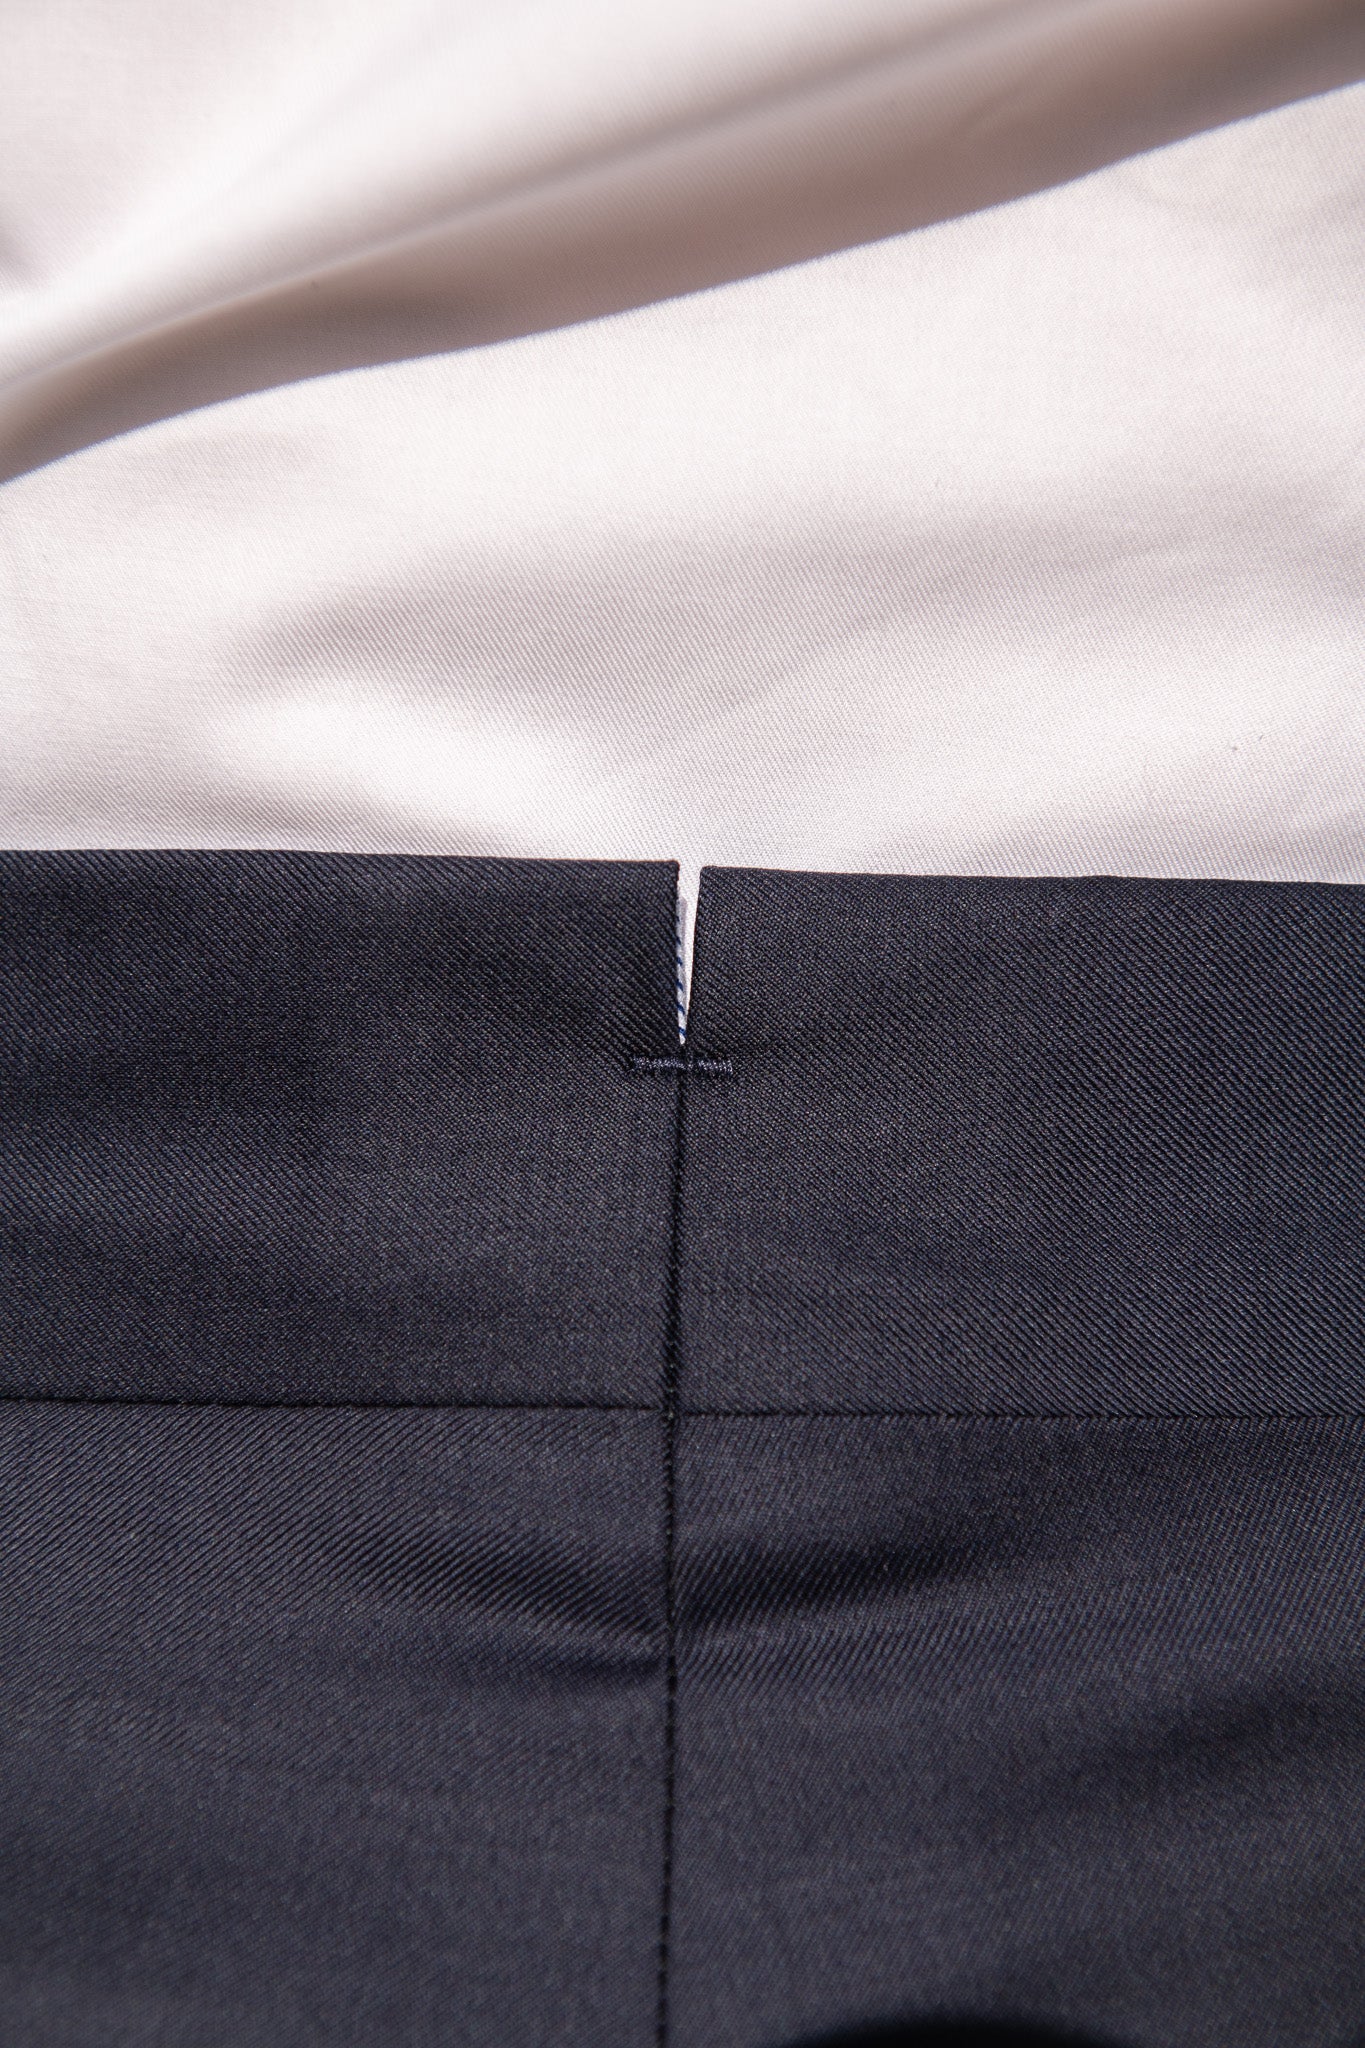 Blue Trousers "Soragna Capsule Collection" - Made in Italy